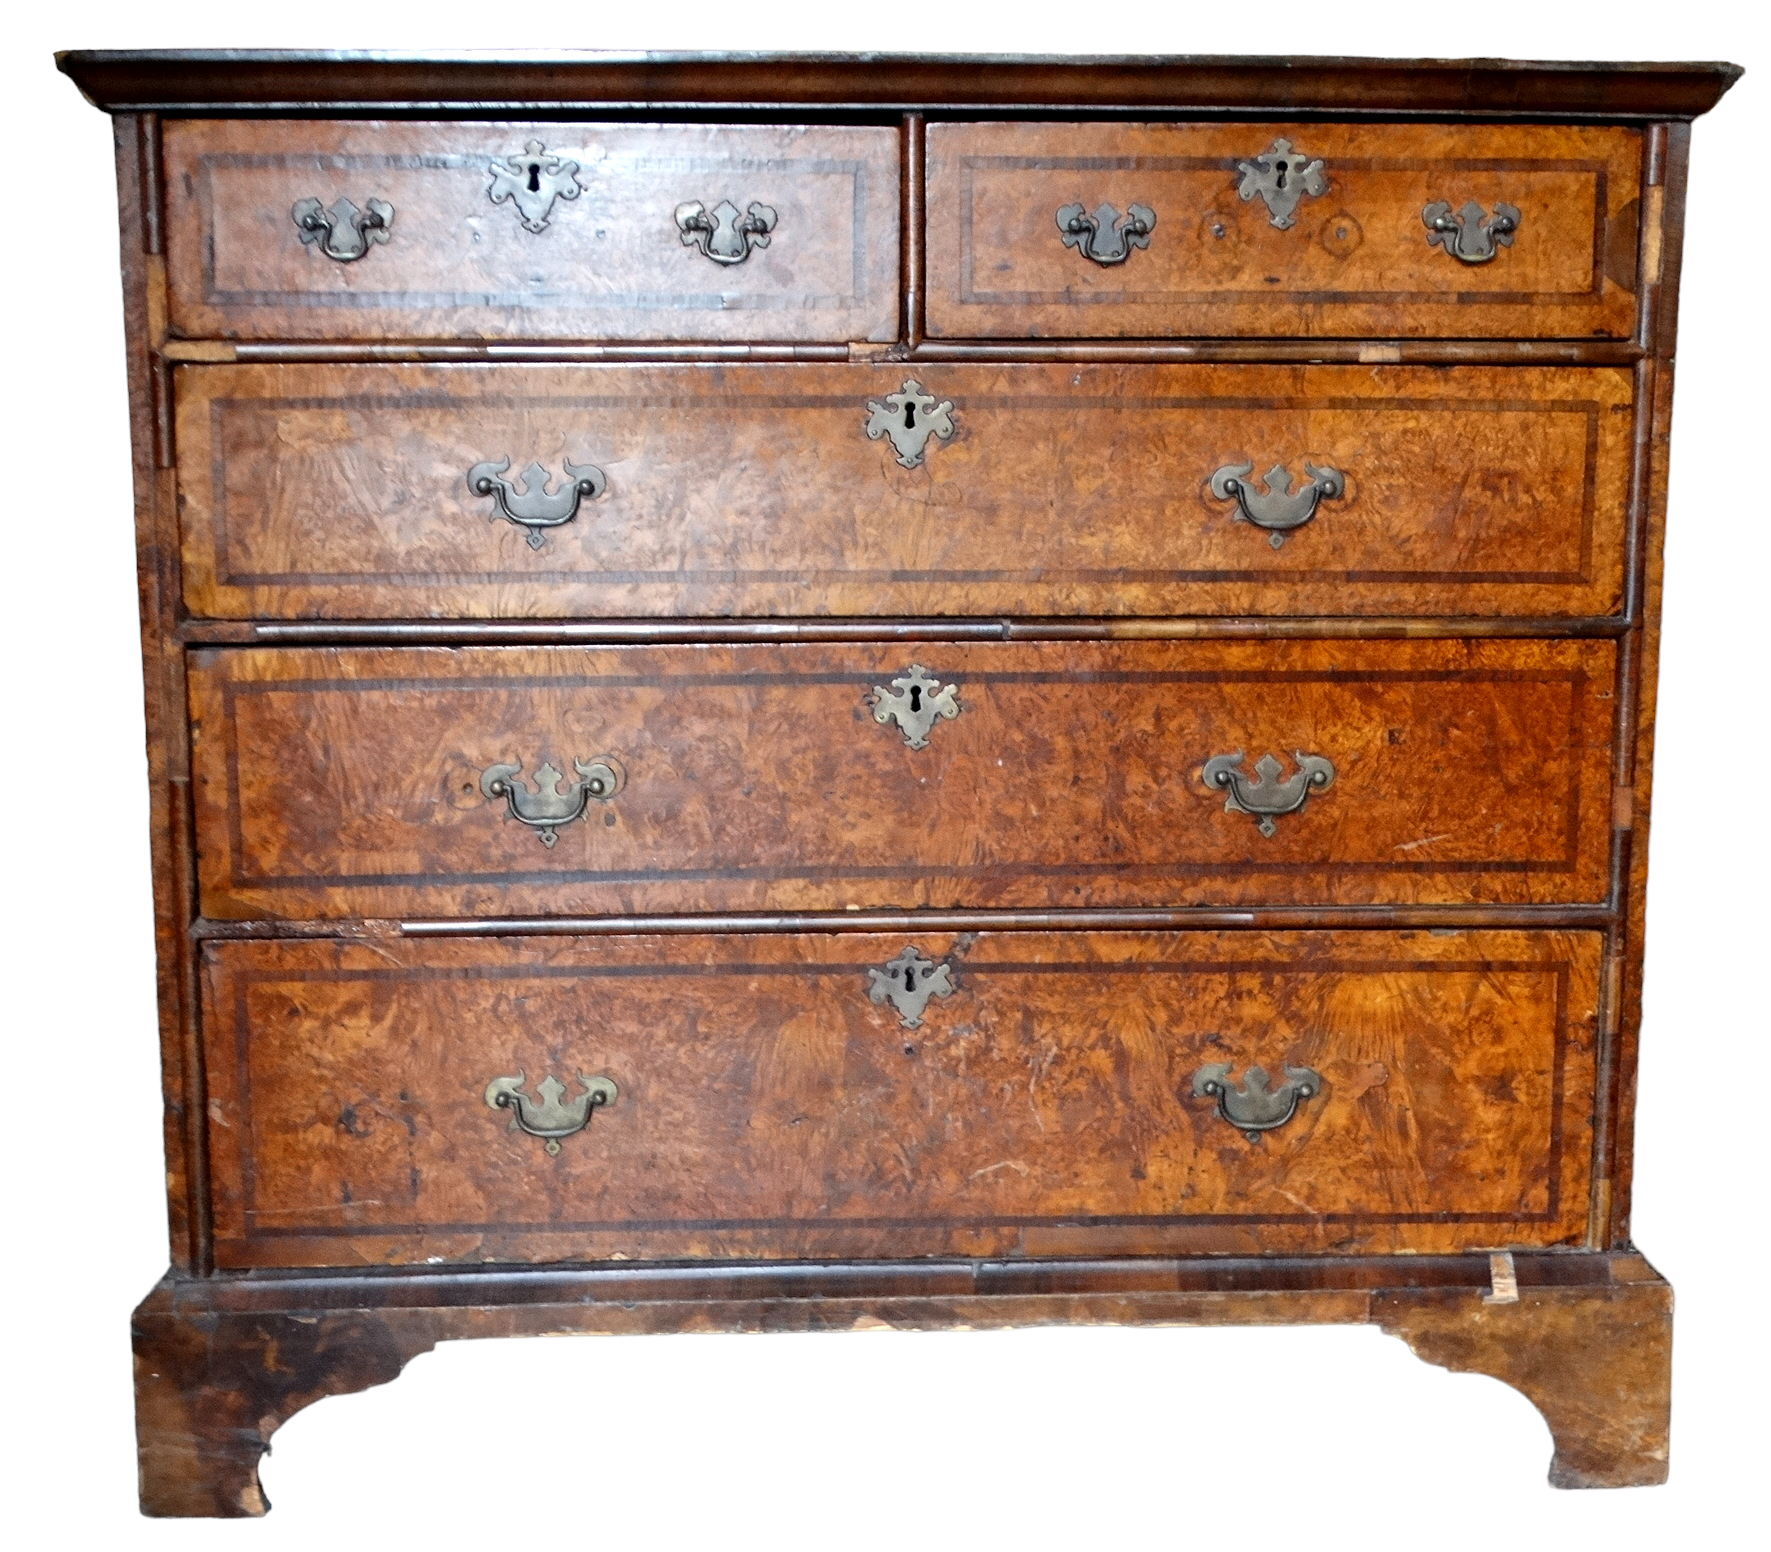 A George II walnut chest of drawers - the quartered veneered top above an arrangement of two short